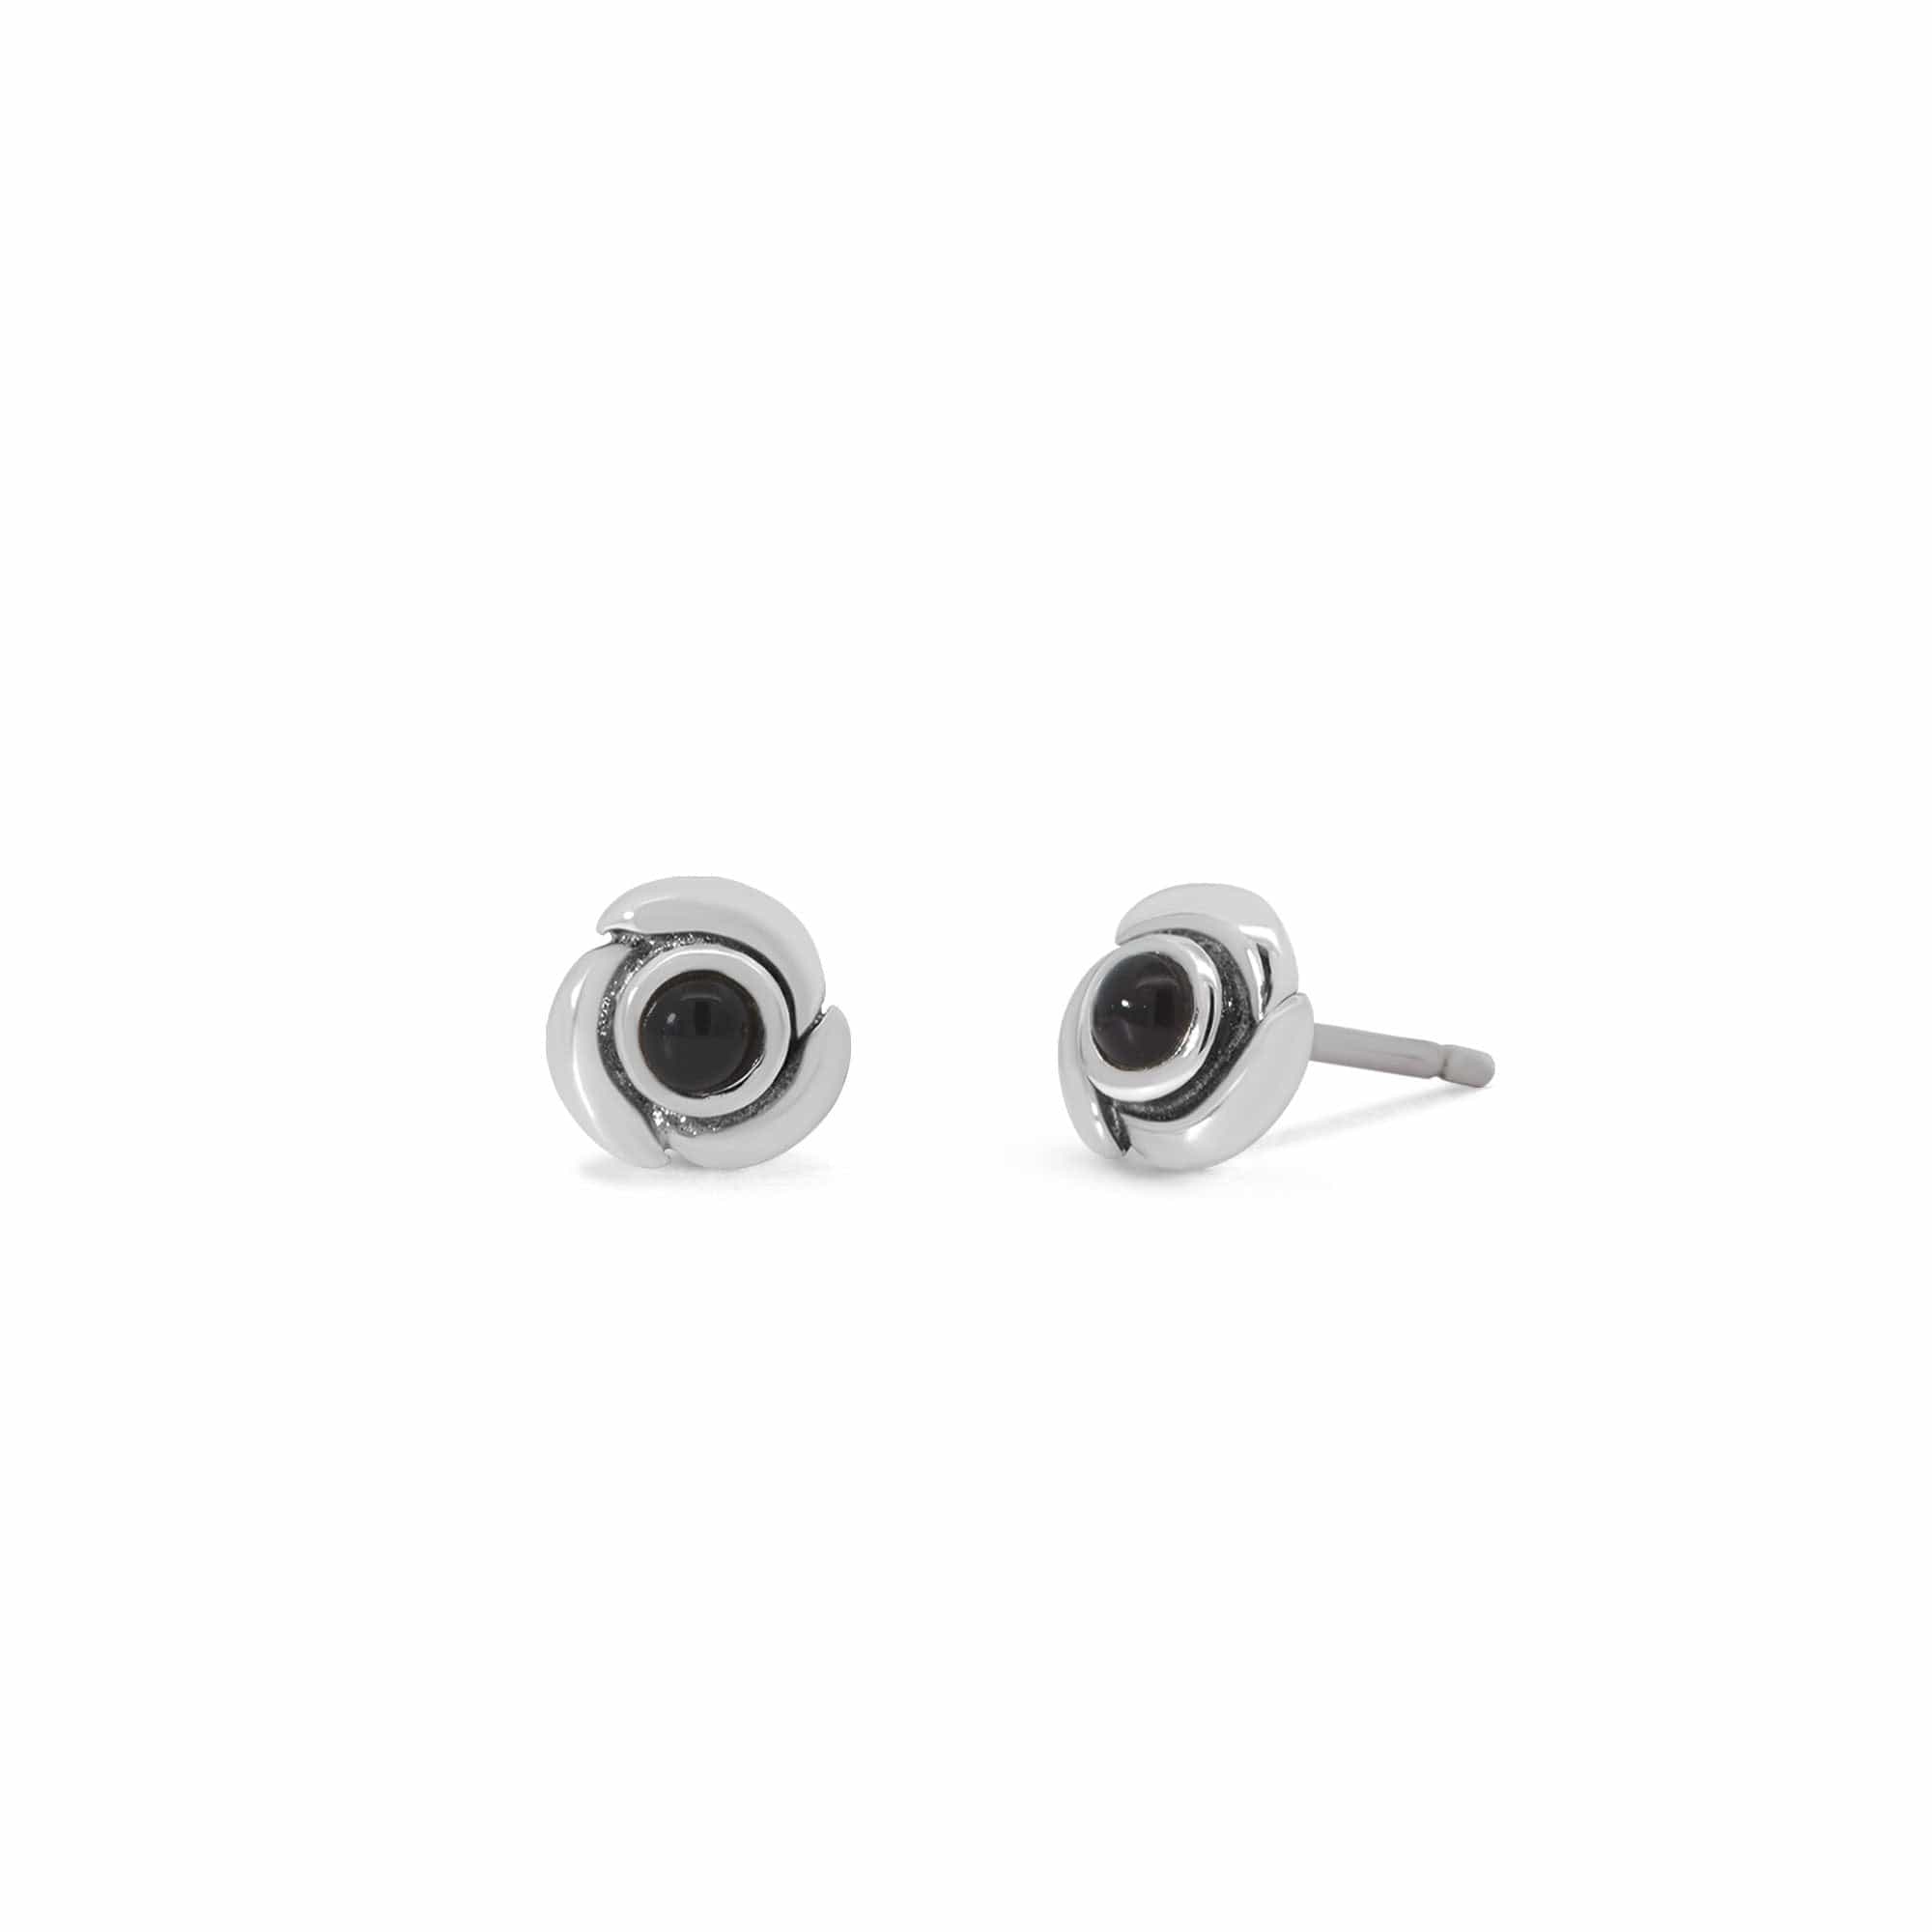 Boma Jewelry Earrings Onyx Spiral Circle Stud Earrings with Stone